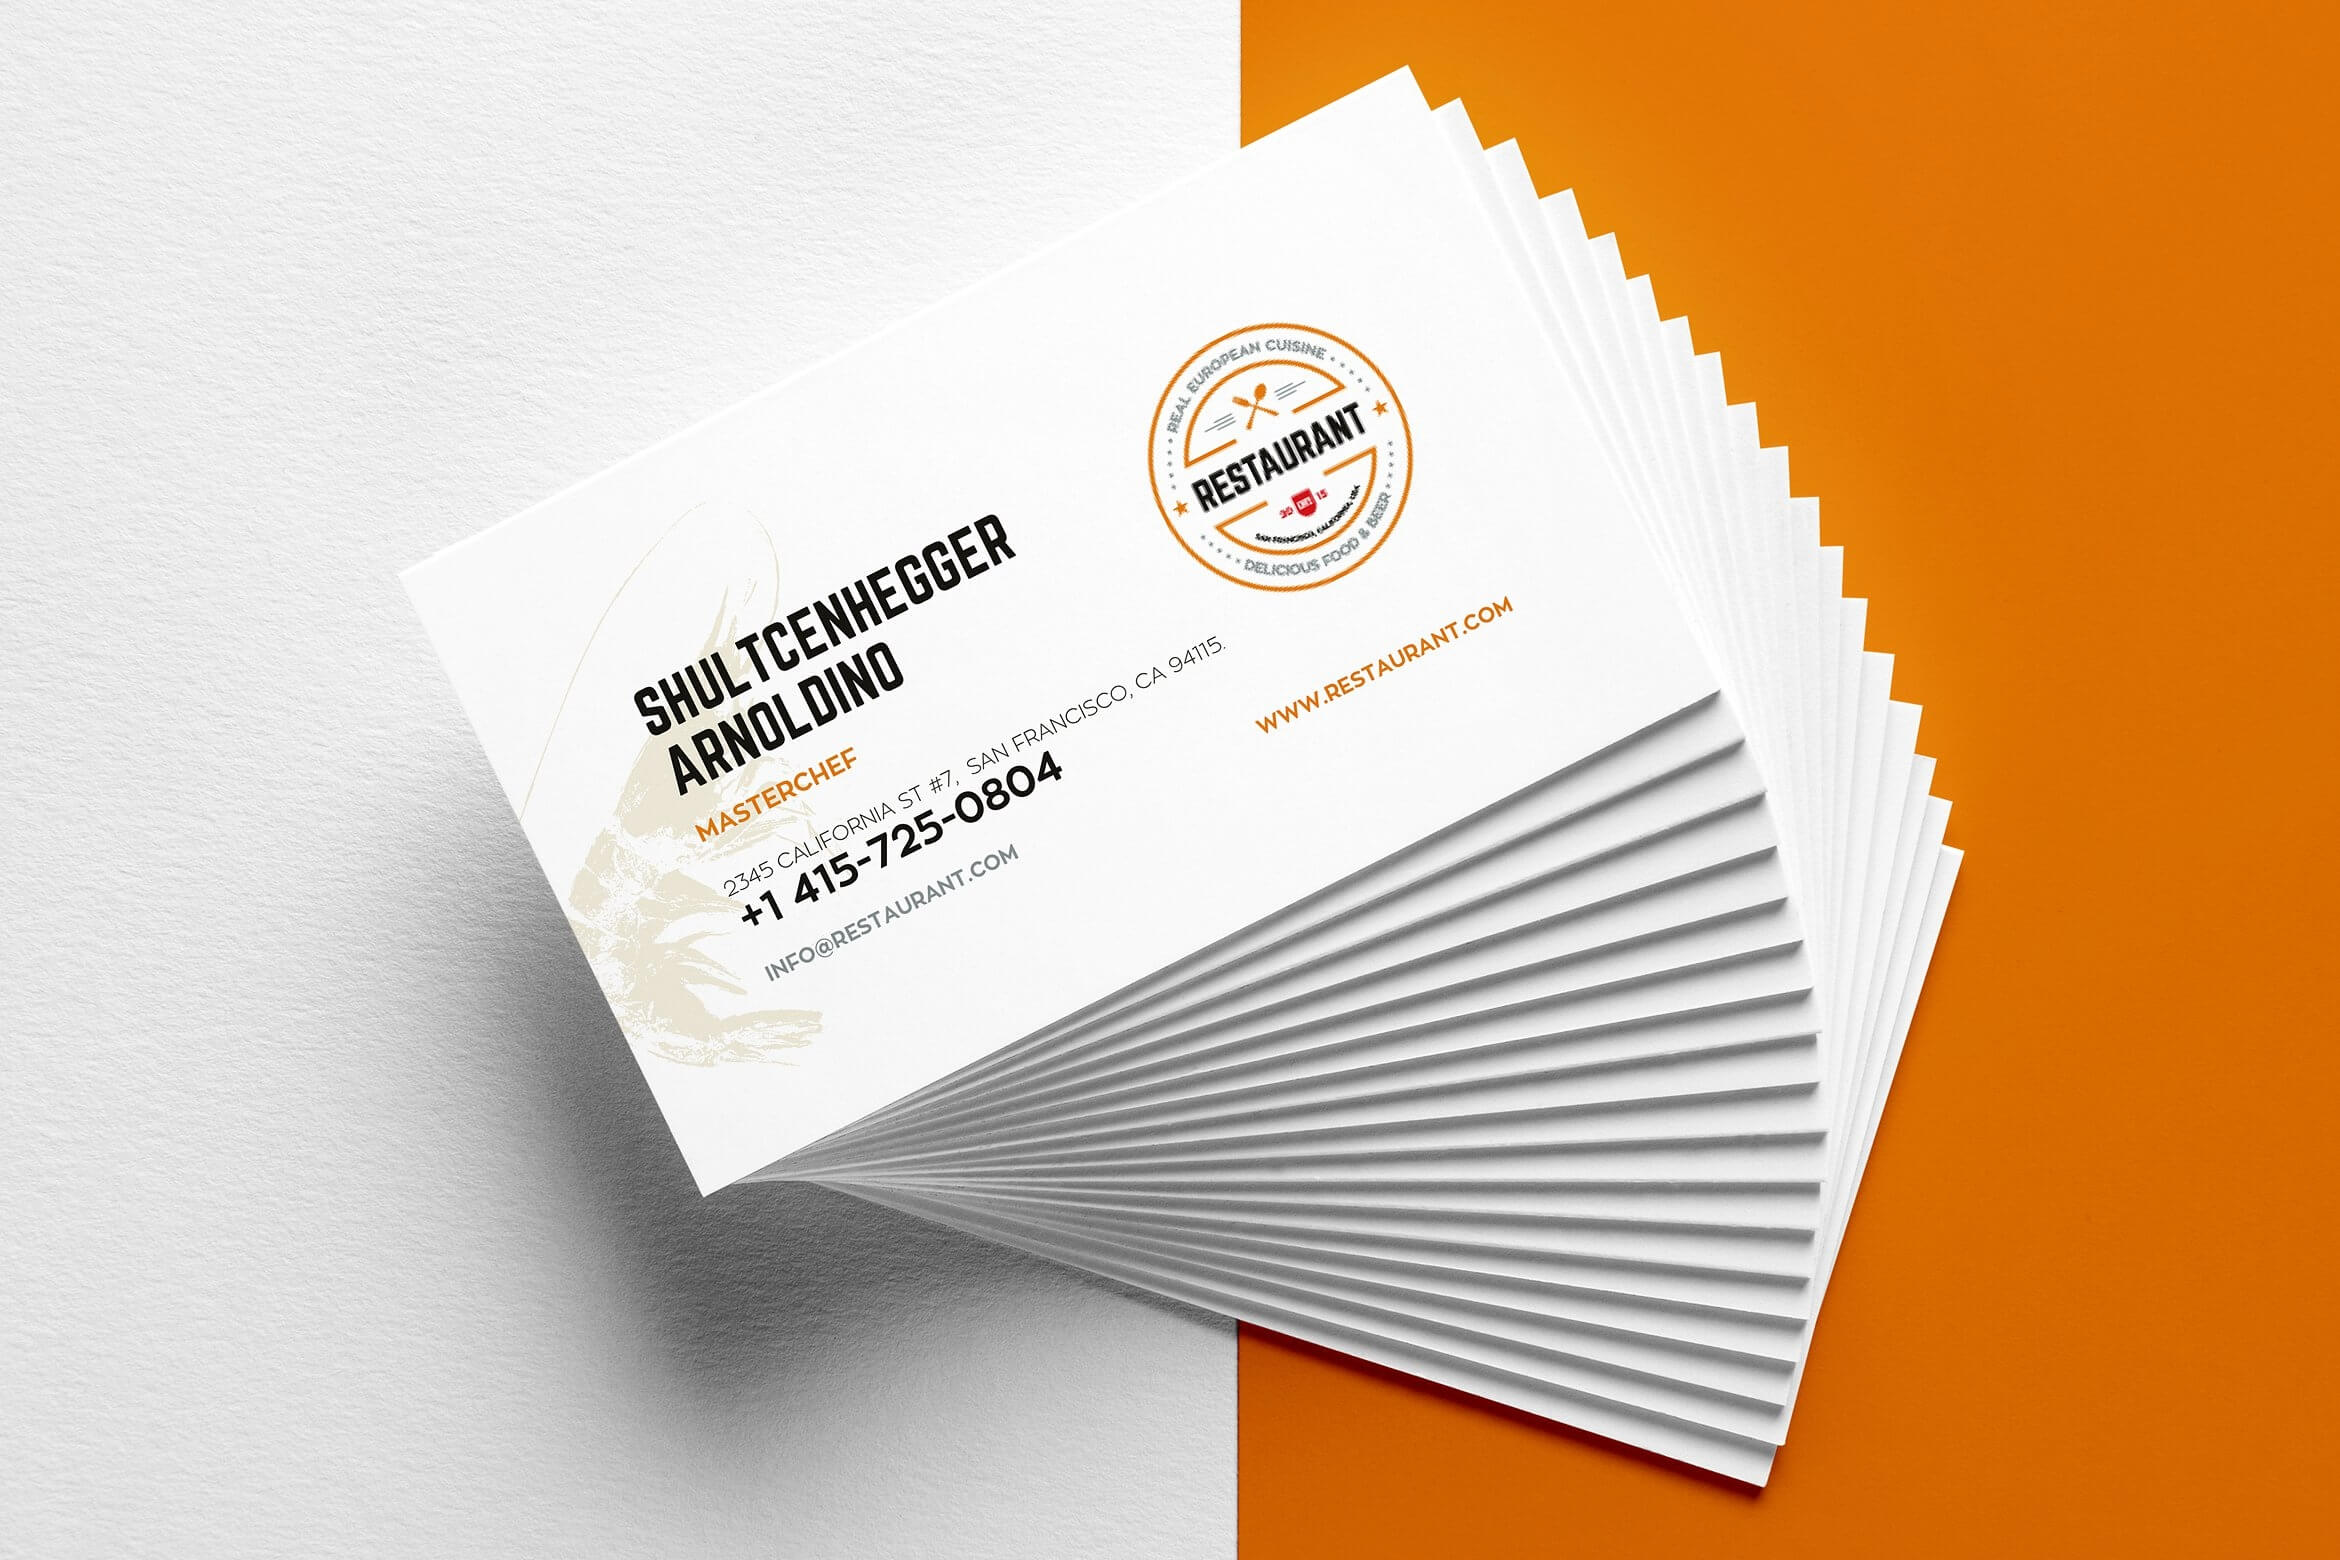 006 Bcard1 Free Blank Business Card Template Psd Remarkable Pertaining To Blank Business Card Template Download